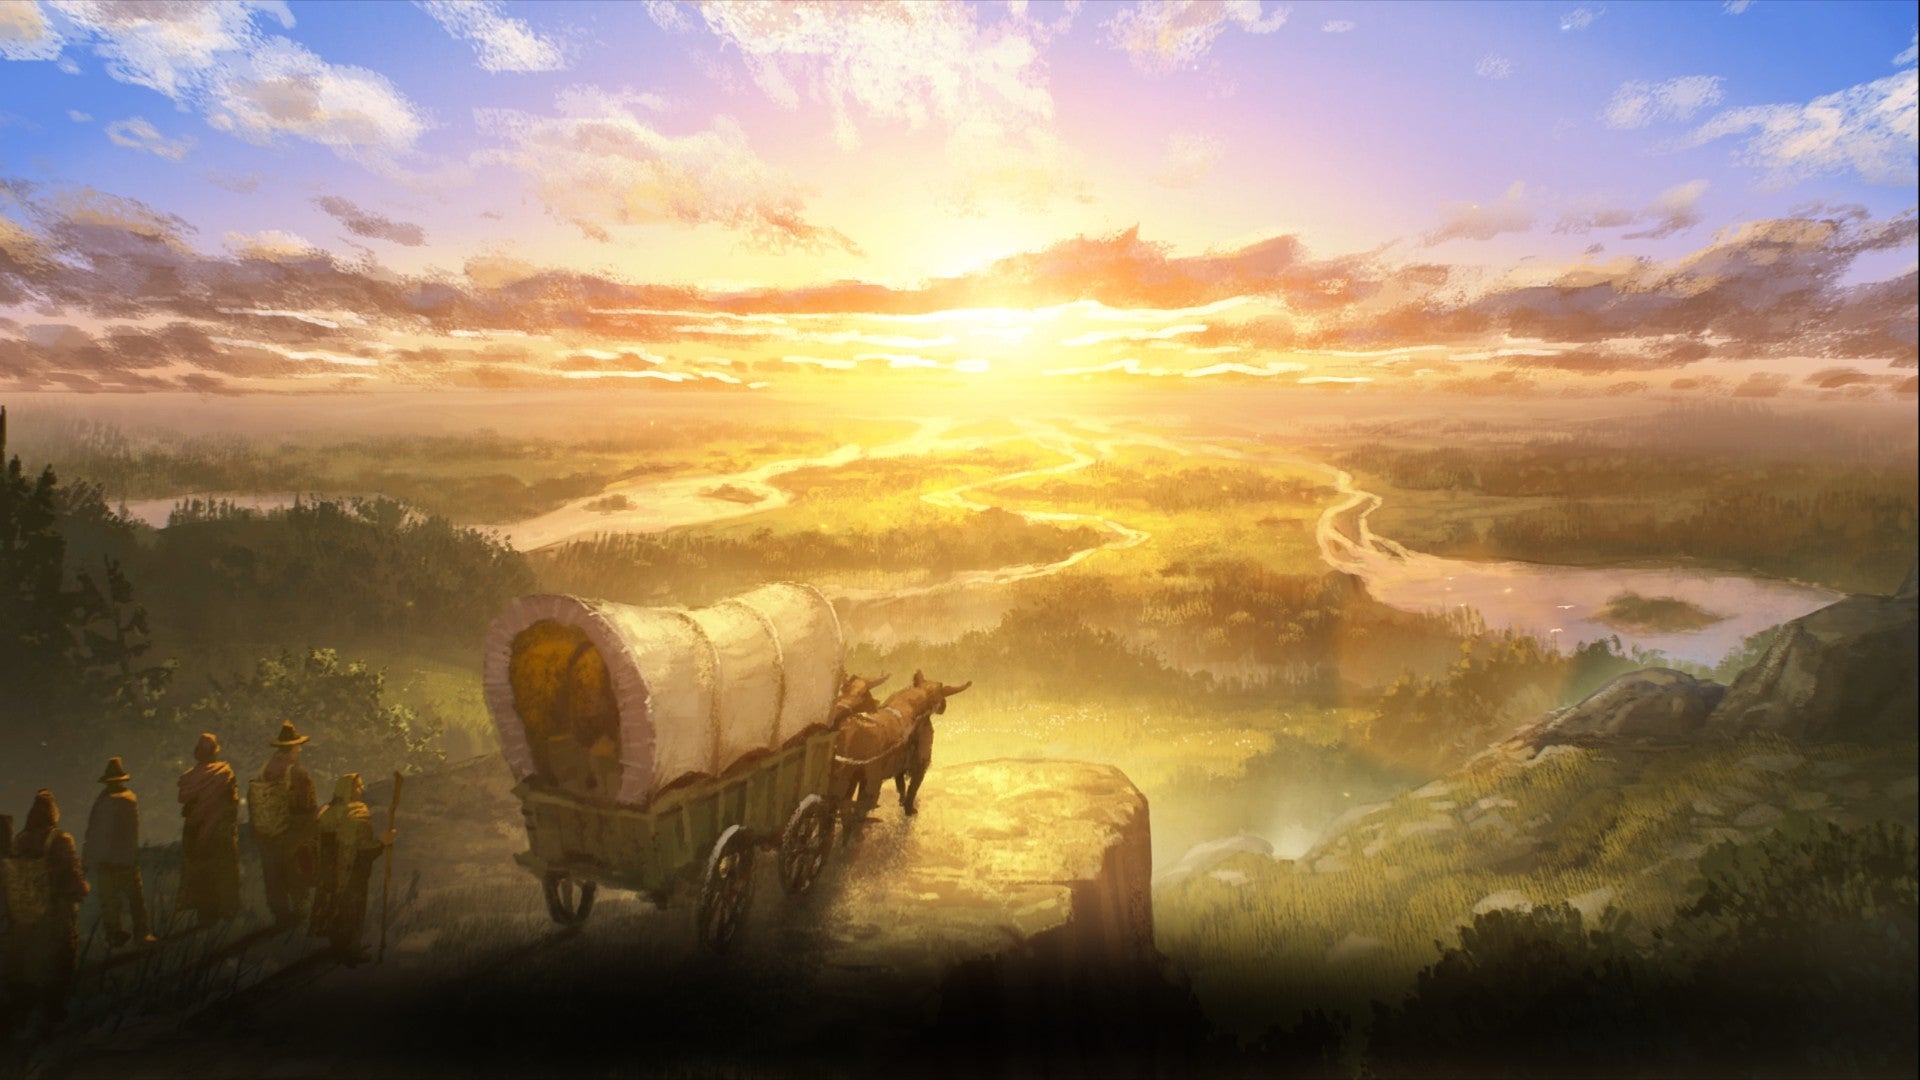 A painterly image of a wagon on a peak at sunset, overlooking a lush land of new starts and promise.